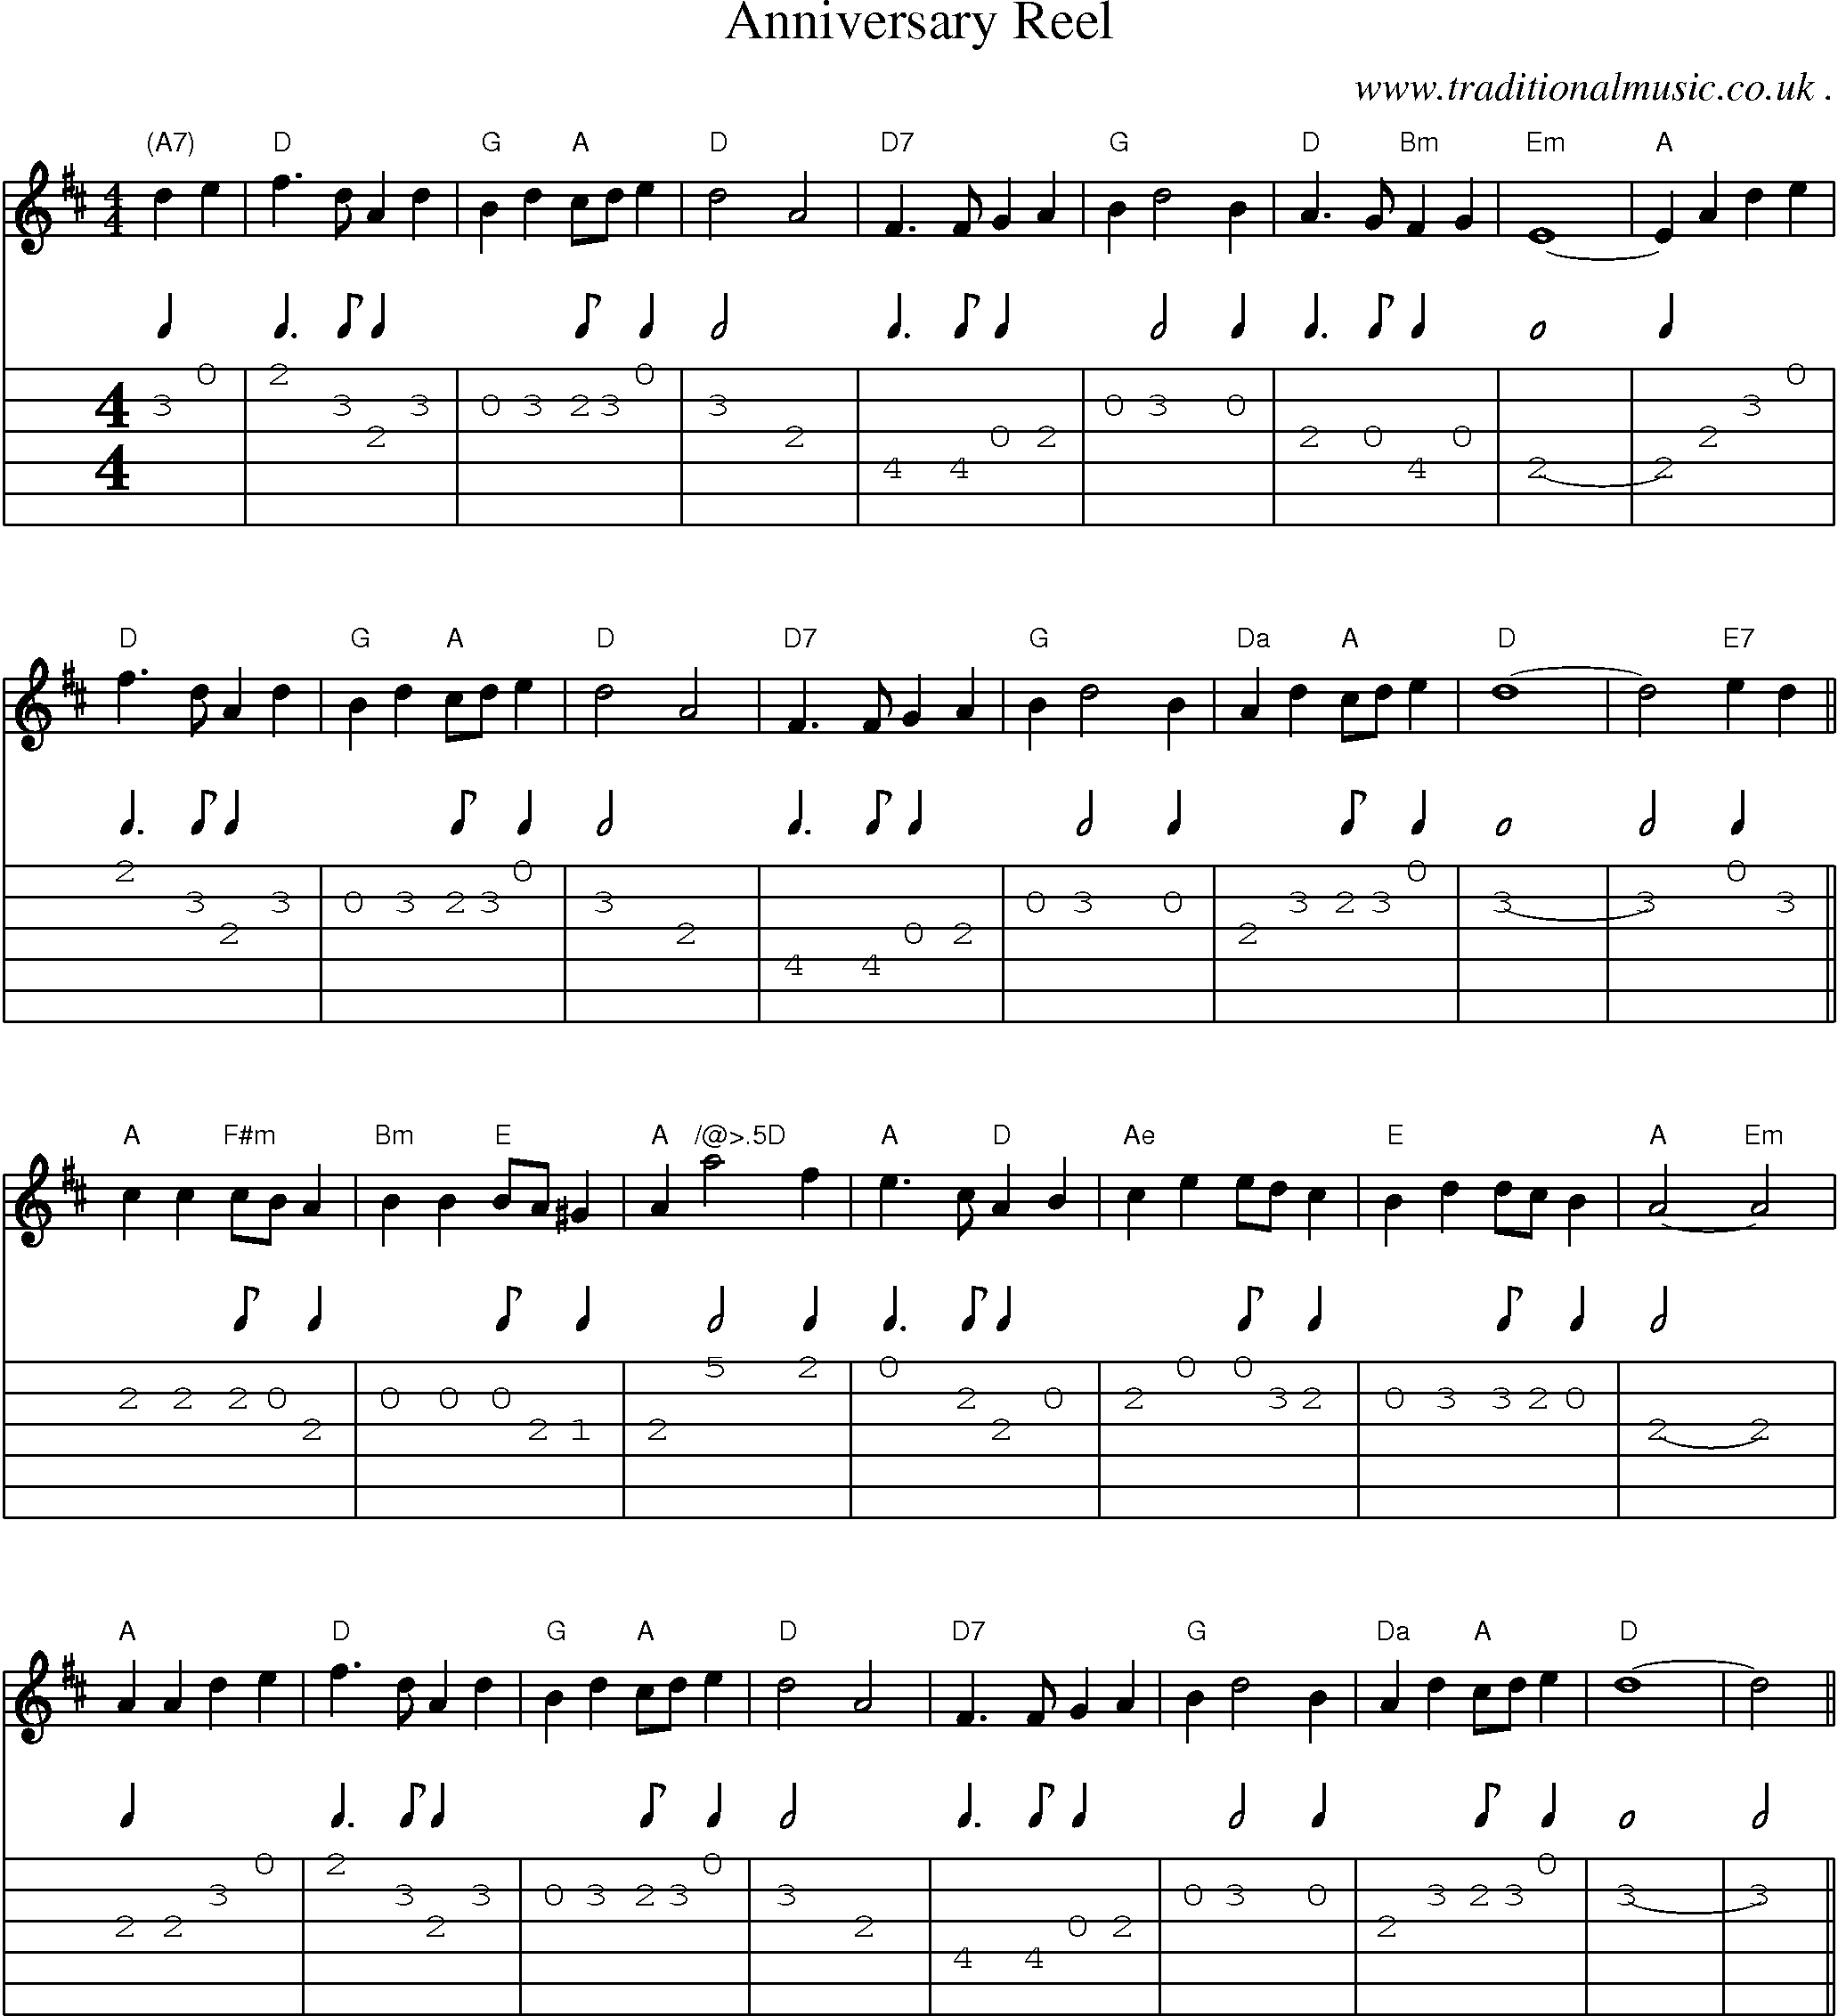 Sheet-Music and Guitar Tabs for Anniversary Reel